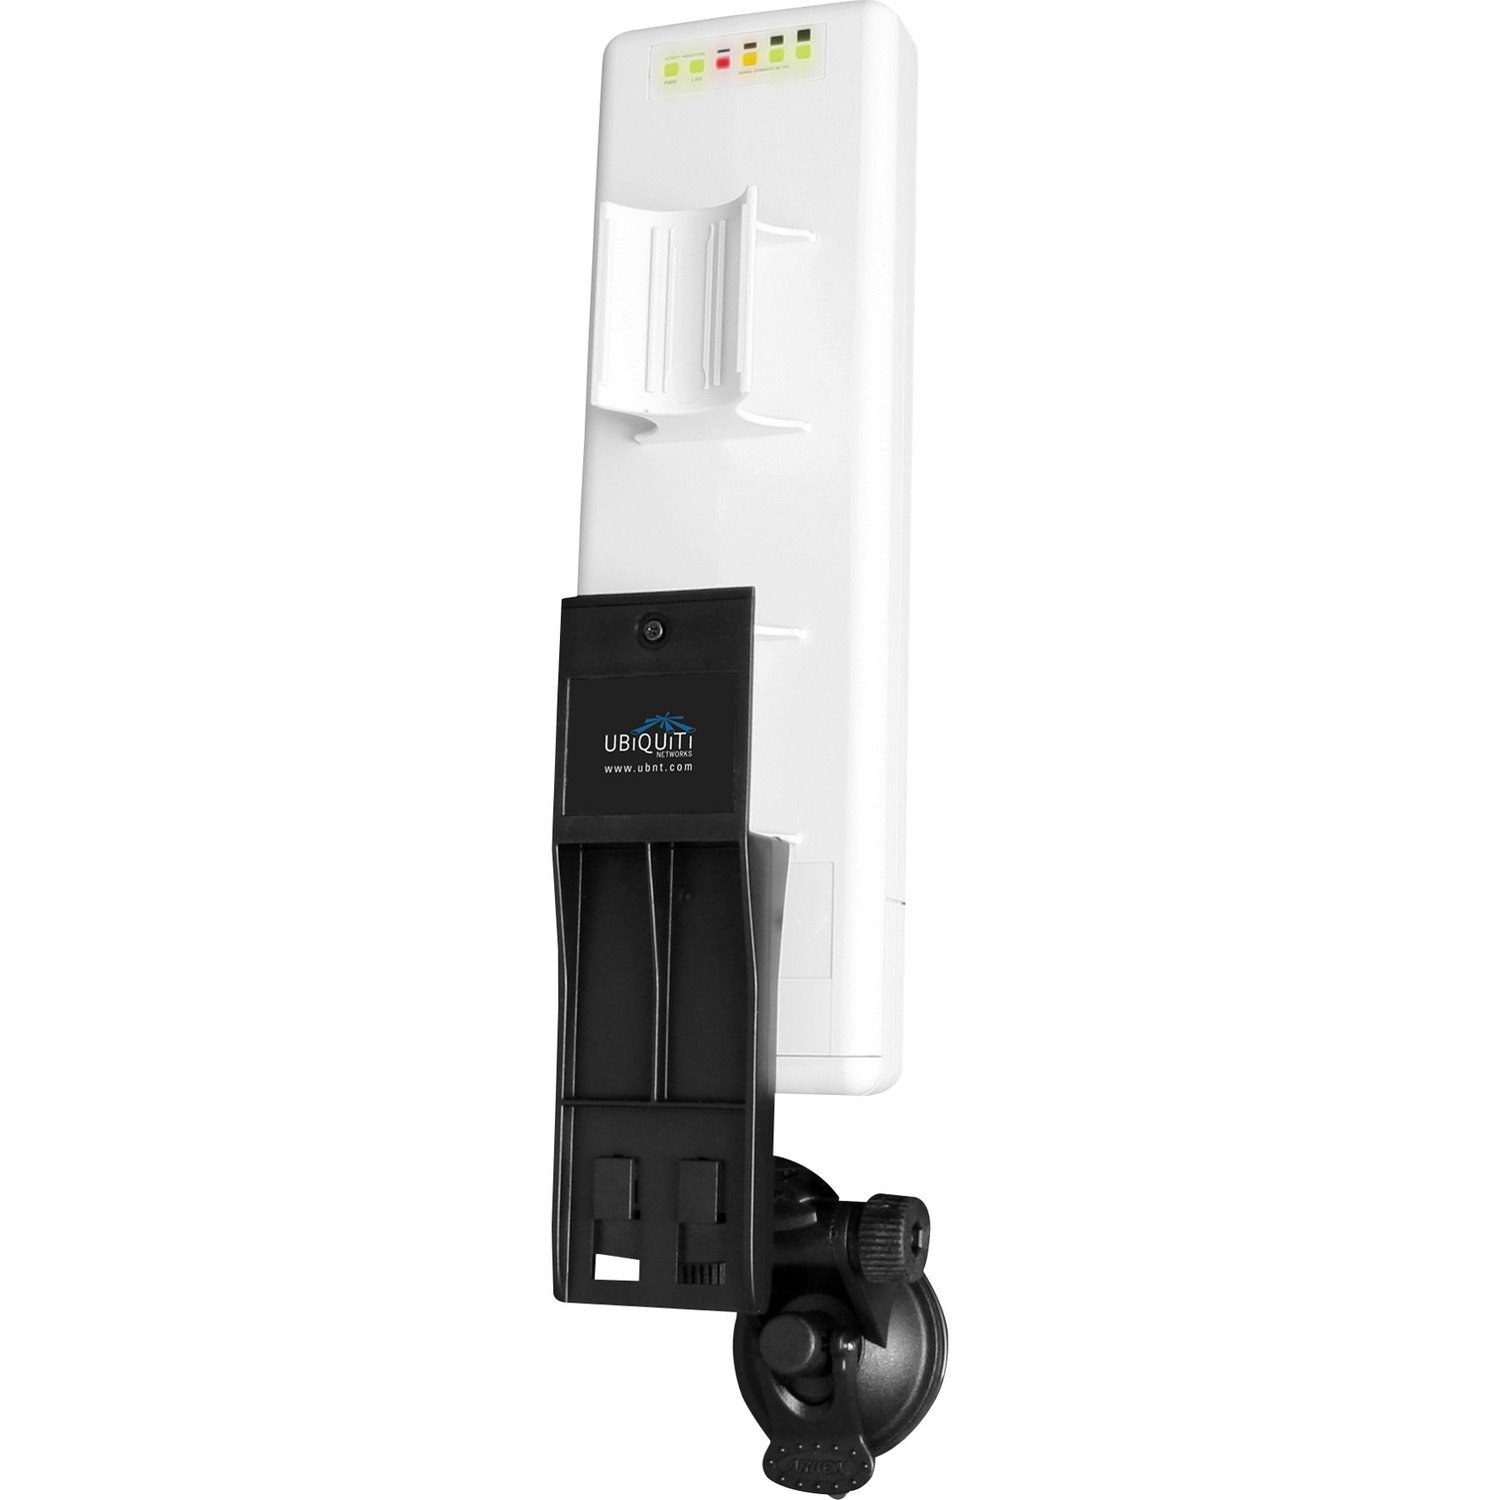 Ubiquiti Wall Mount for Wireless Access Point